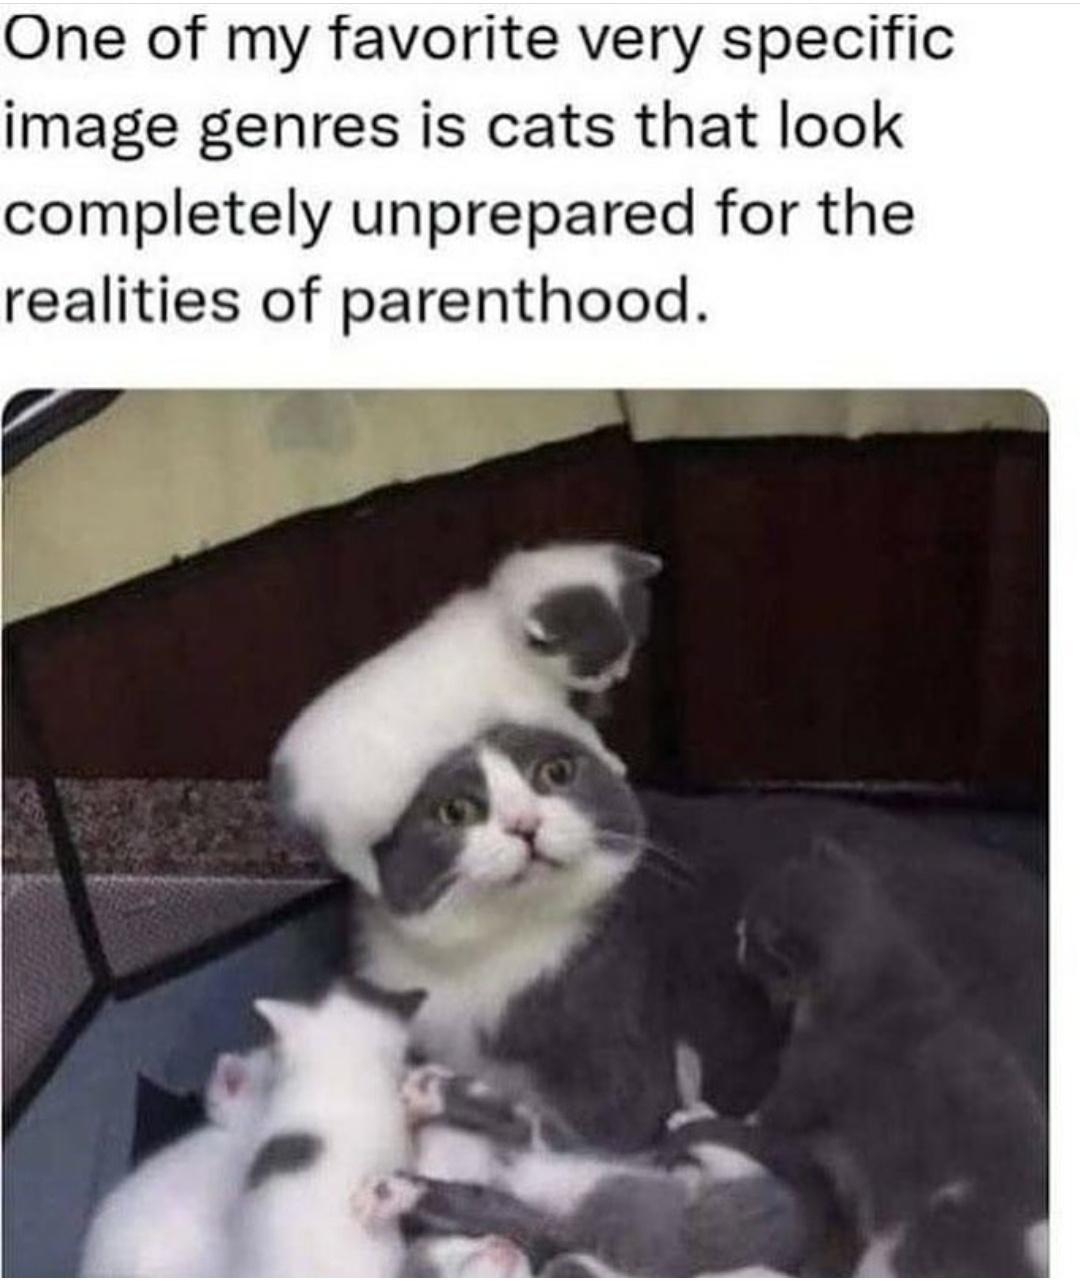 Cat Memes - cats that look unprepared for parenthood - One of my favorite very specific image genres is cats that look completely unprepared for the realities of parenthood.